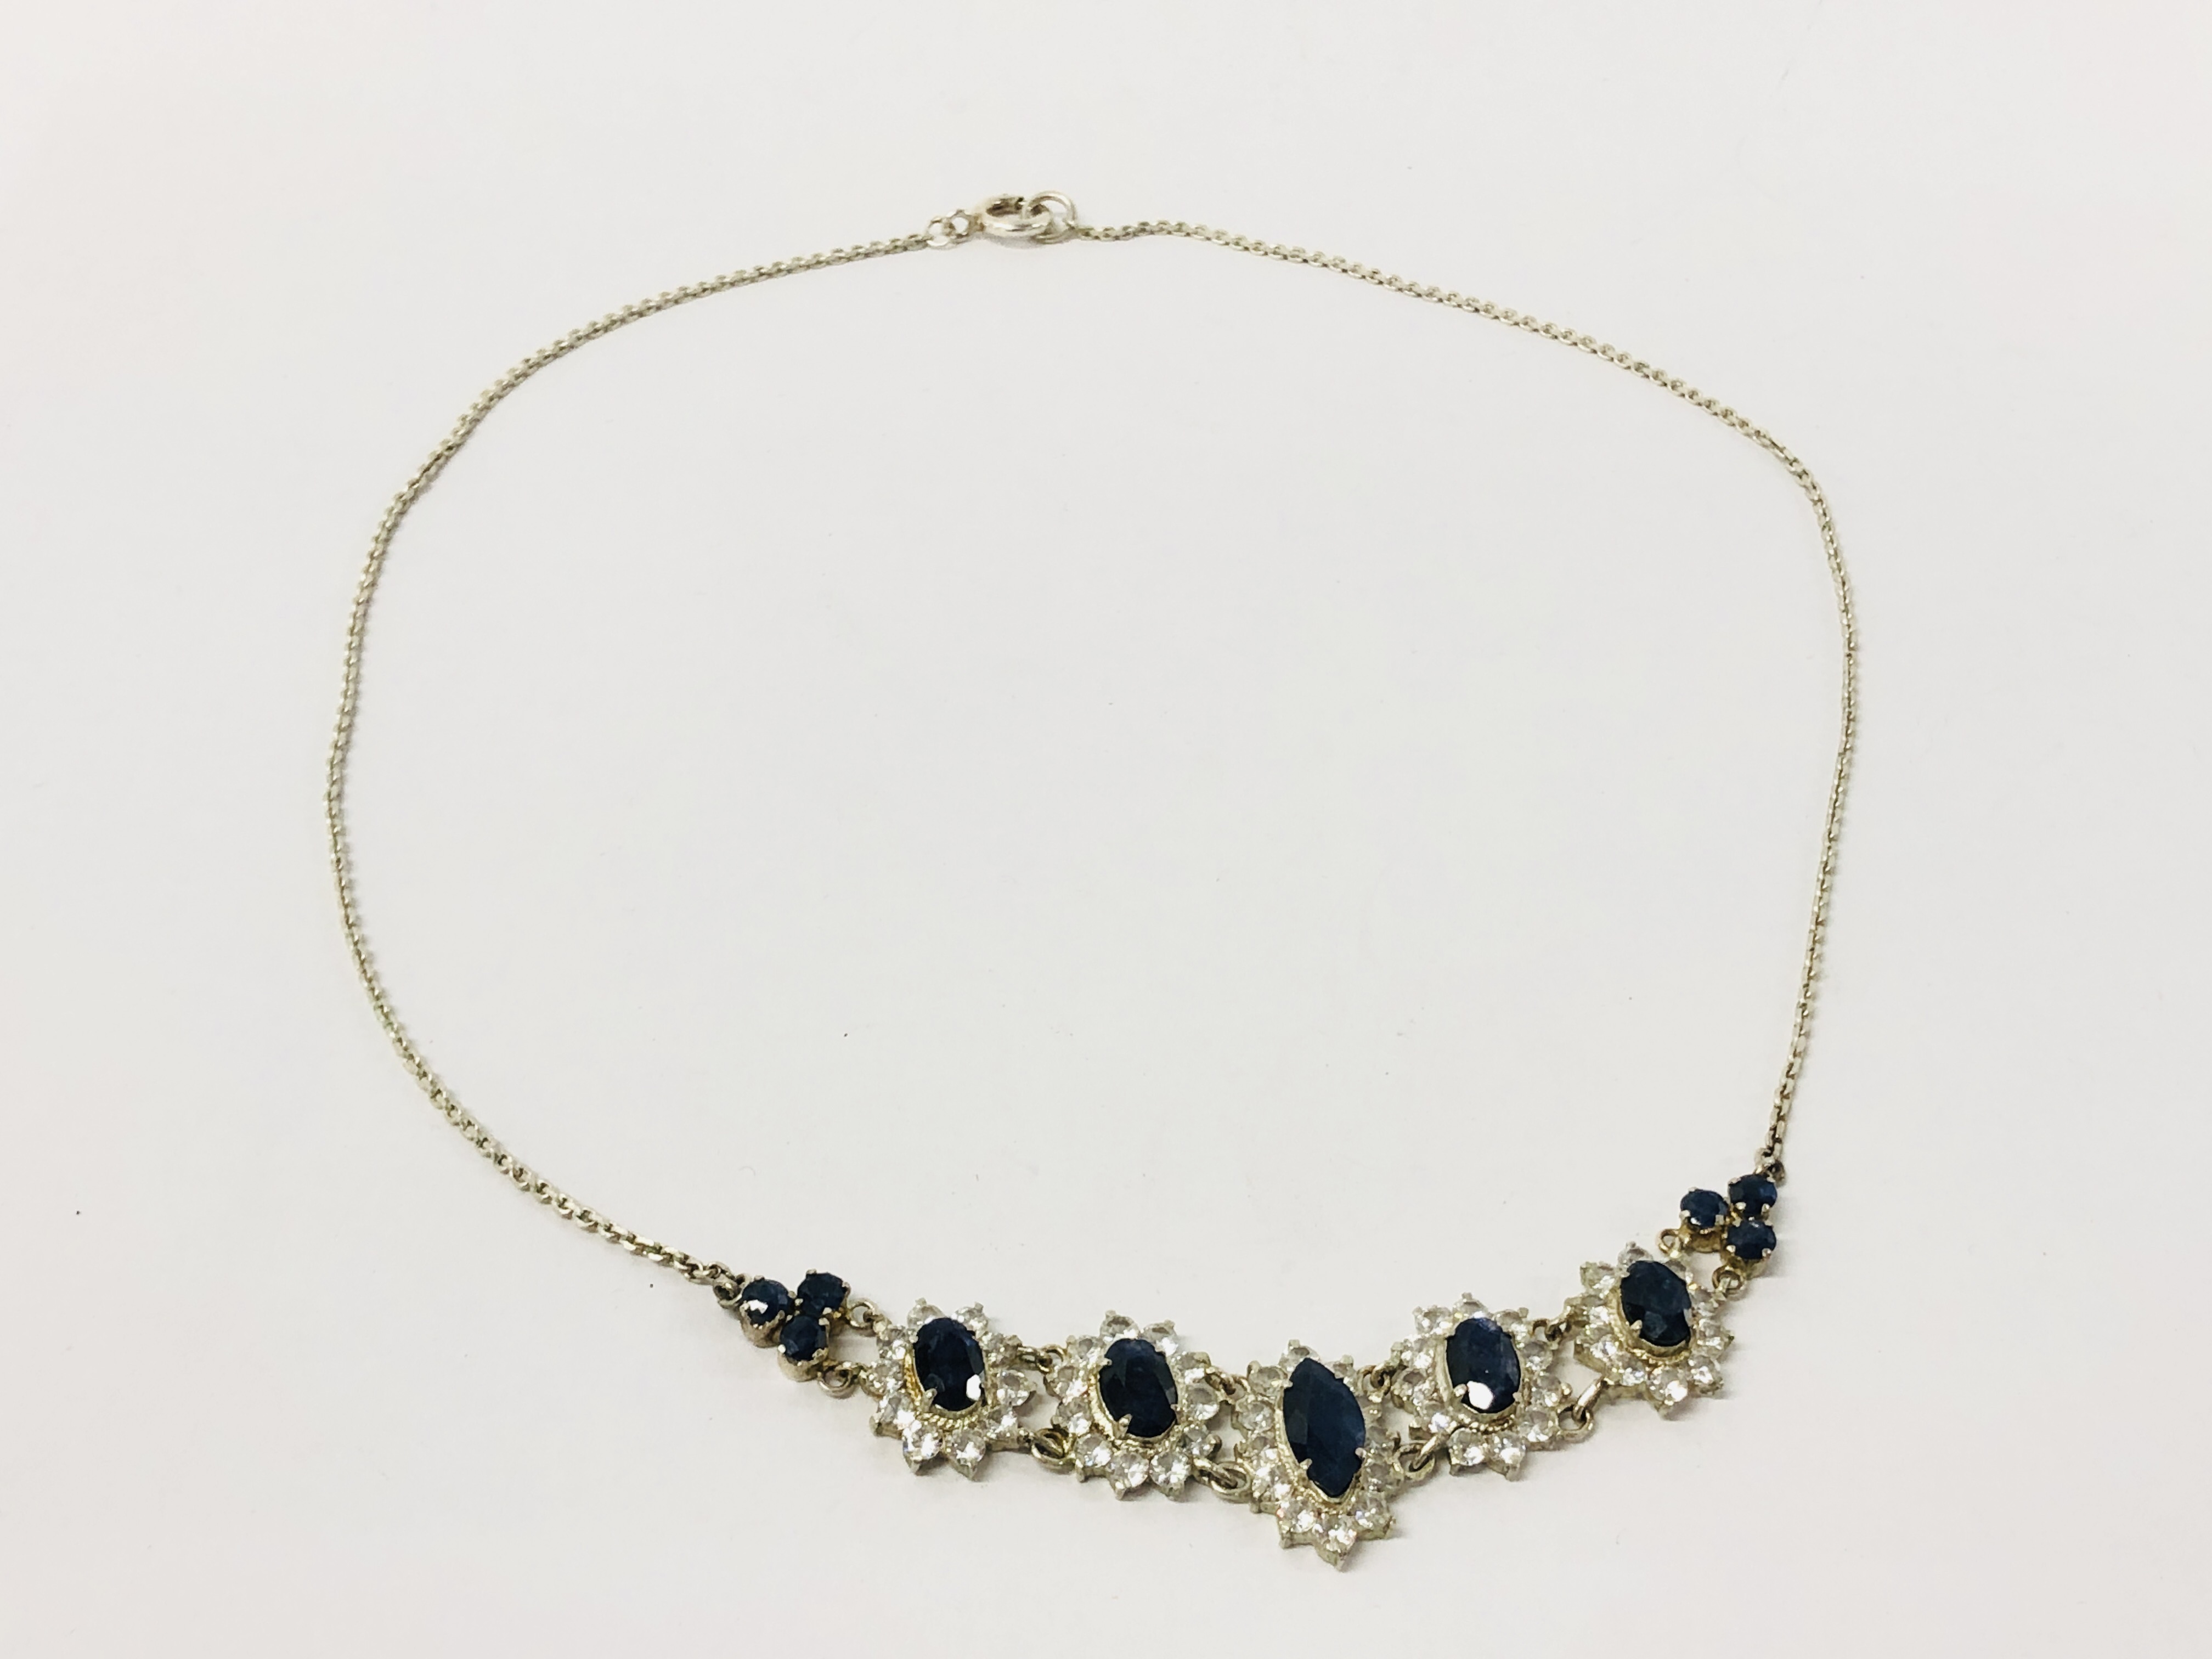 DECORATIVE SILVER EVENING NECKLACE SET WITH CENTRAL BLUE STONE, - Image 3 of 4